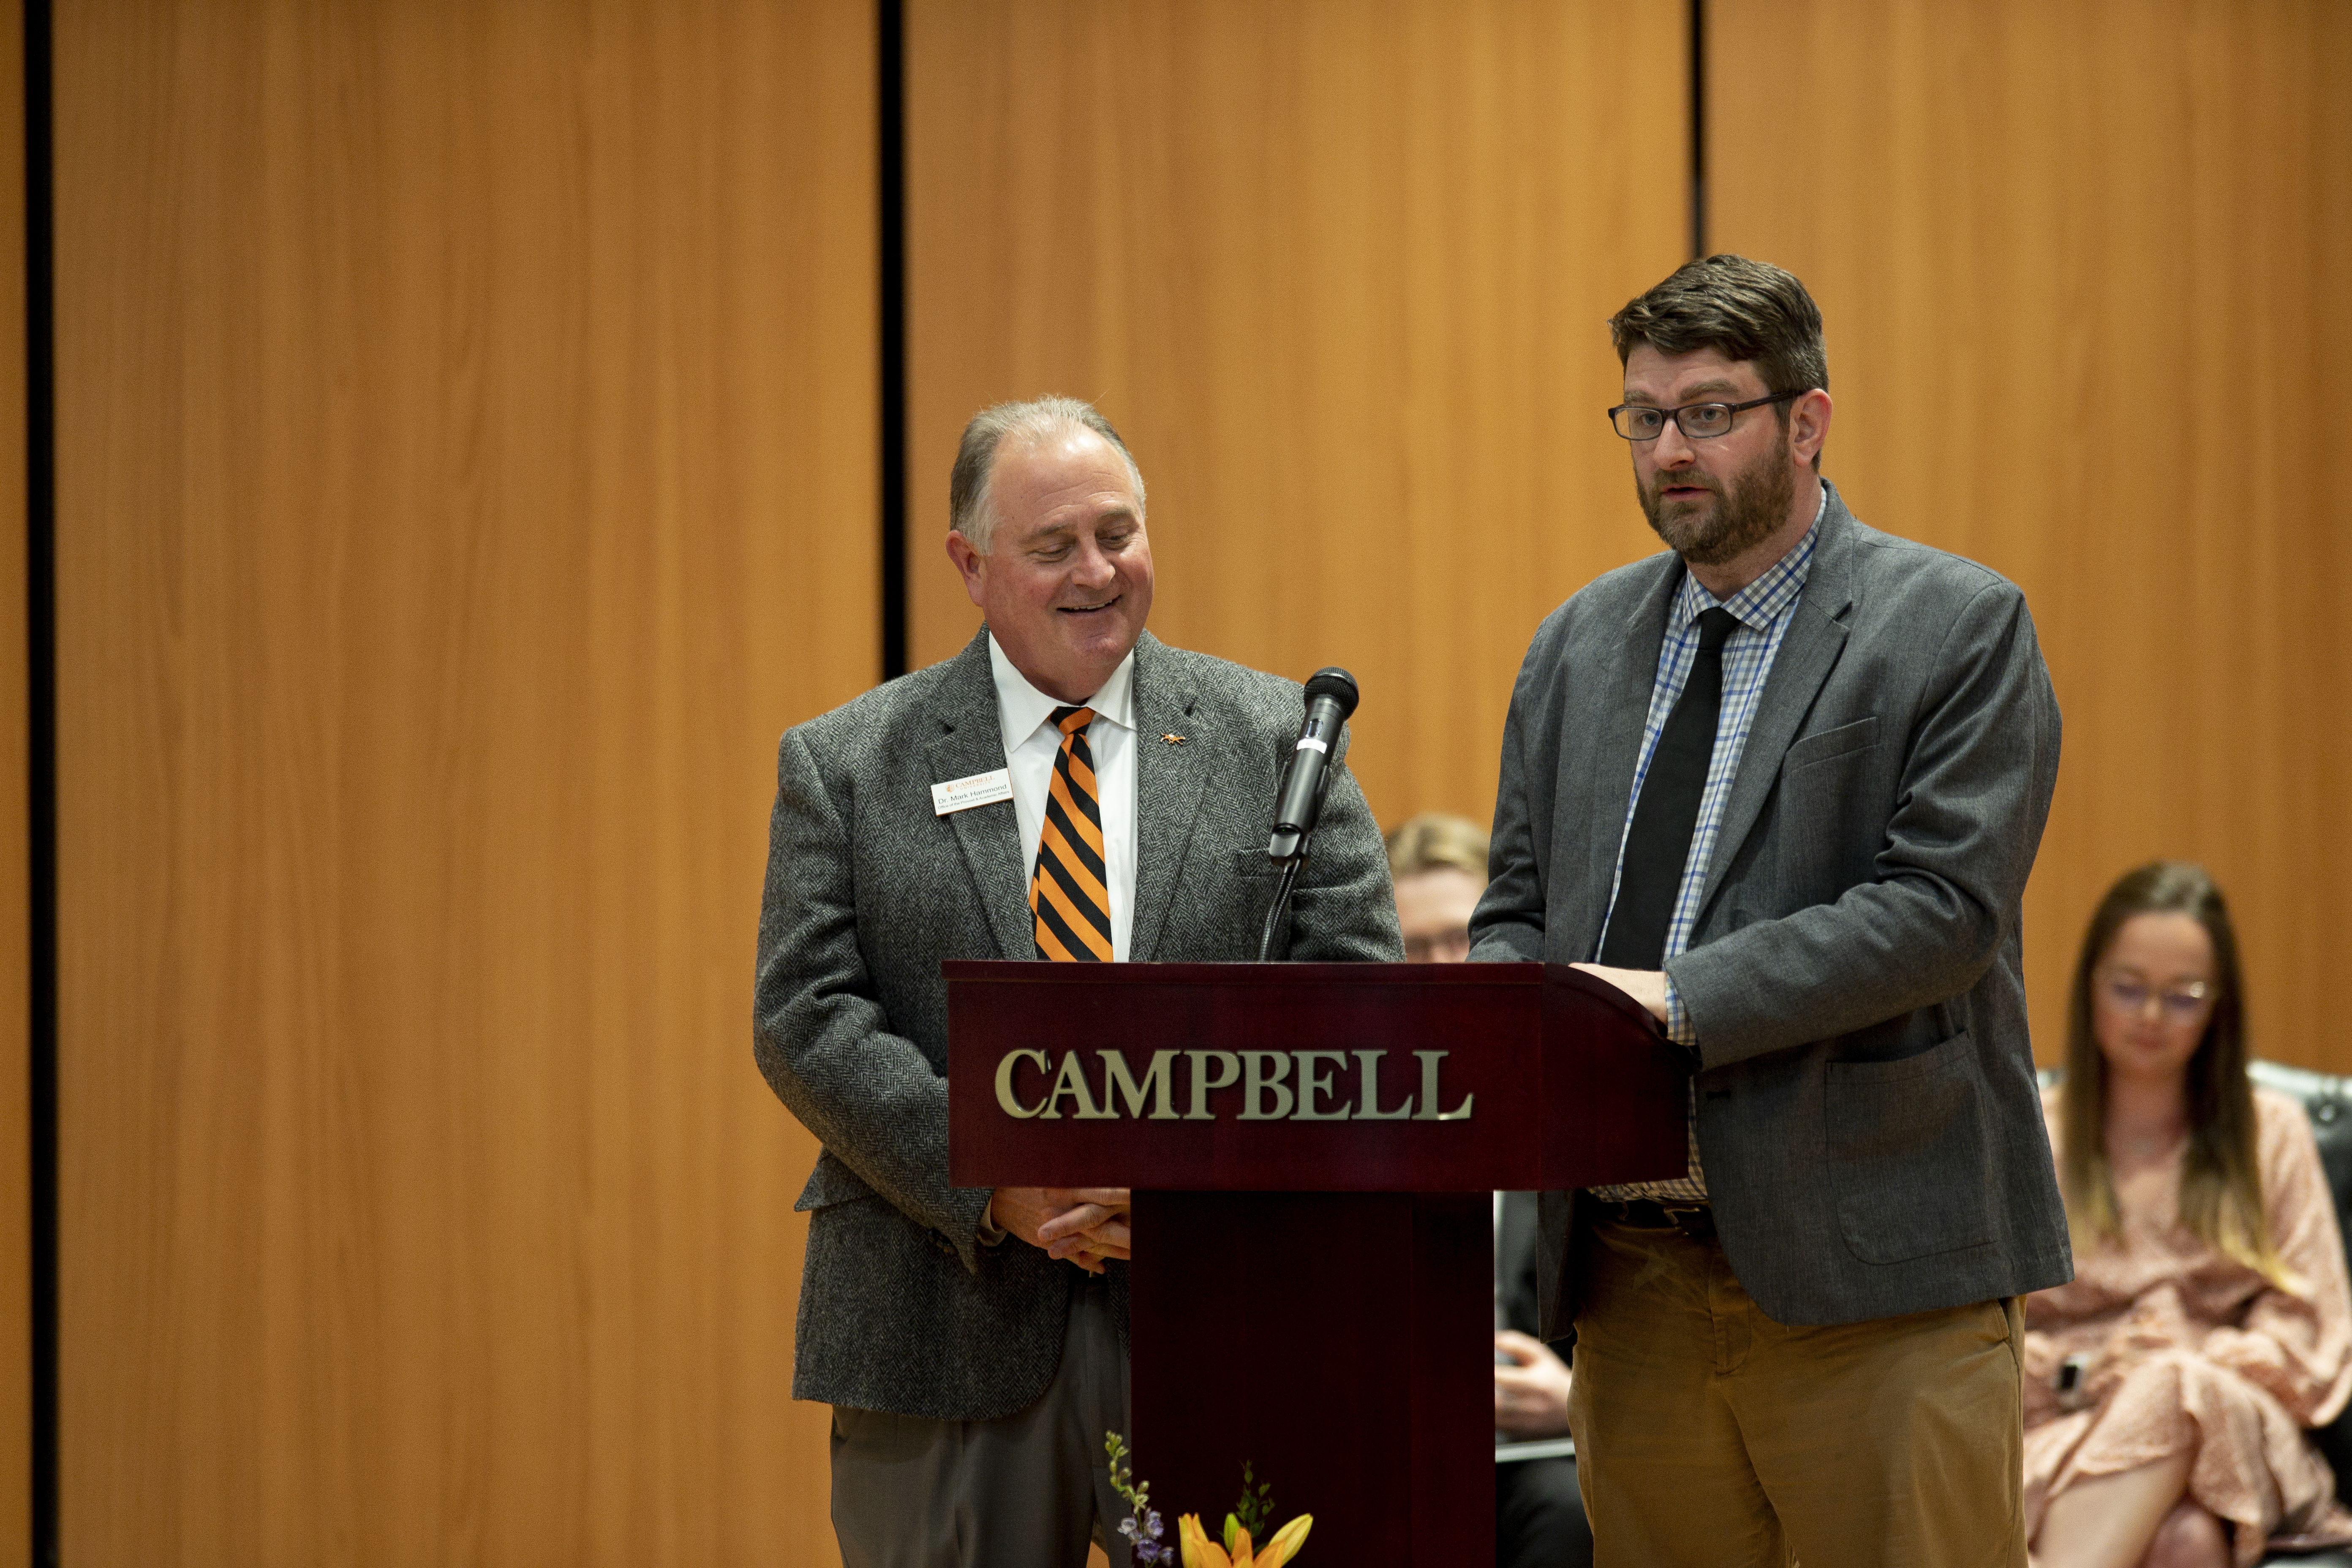 Provost and Symposium Committee Chair present awards